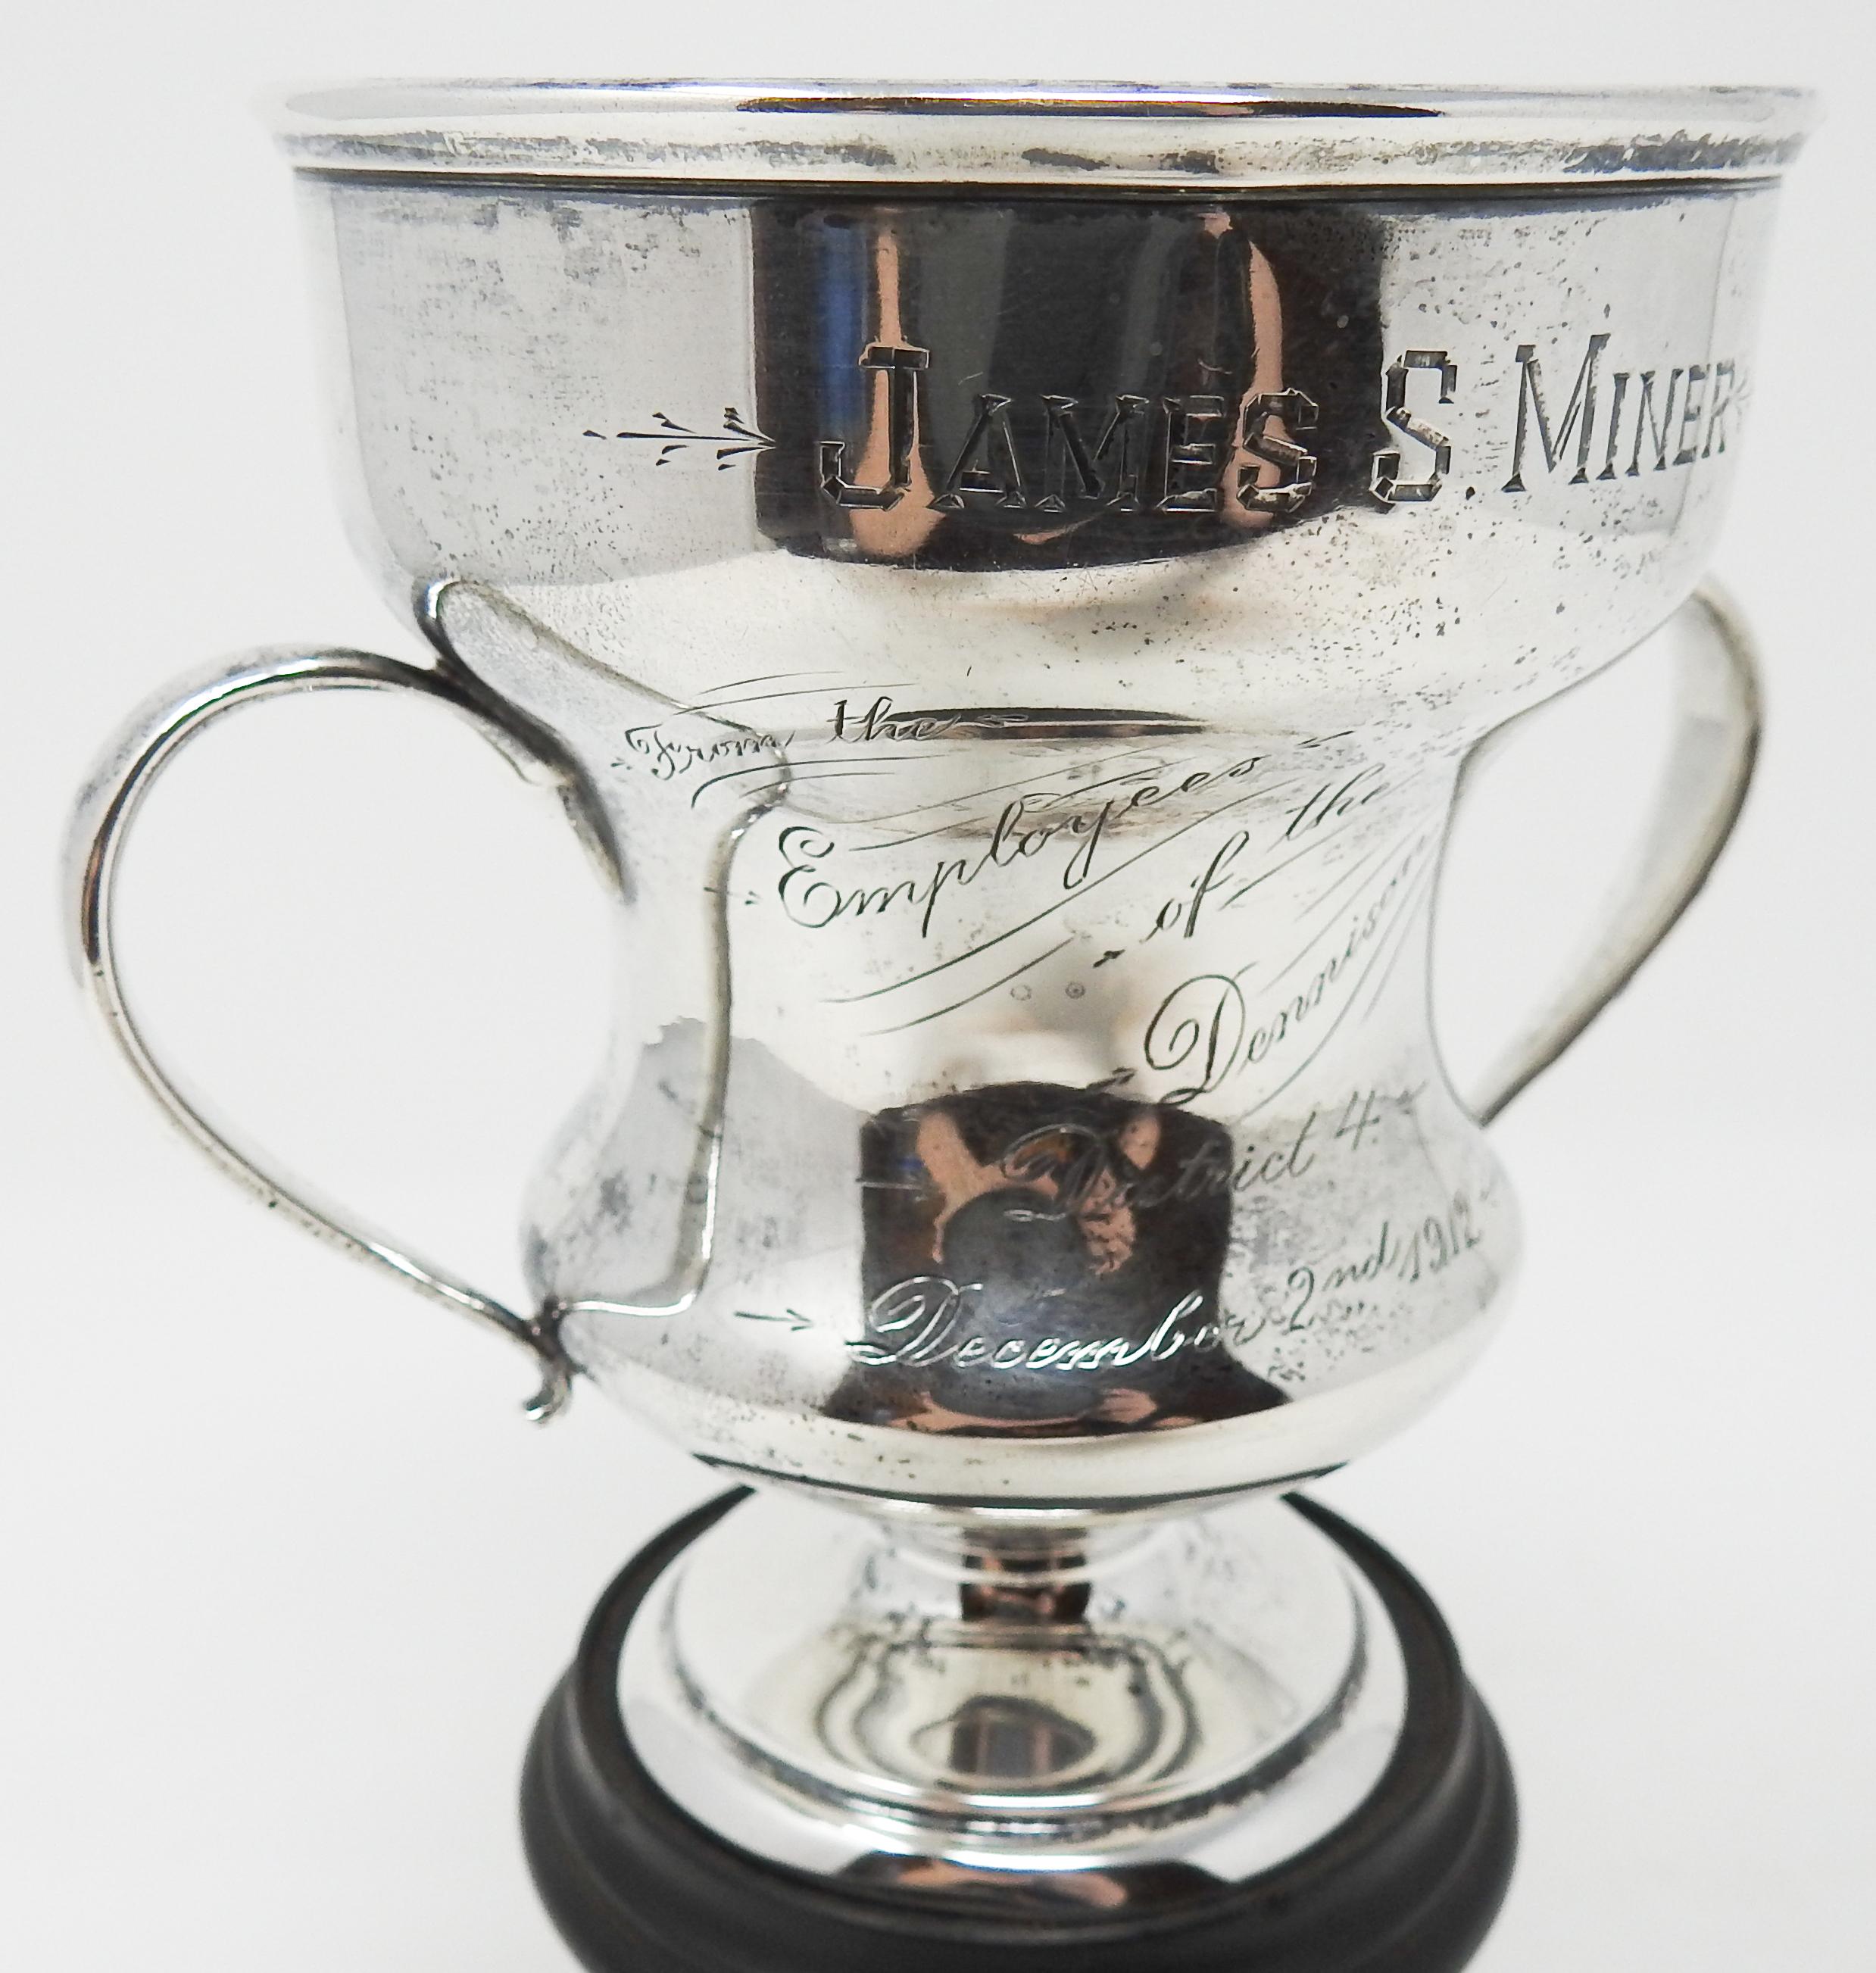 Offering this gorgeous Gorham sterling silver trophy. The trophy is engraved with James S Miner, Employee of the Dennison, District 4, December 2, 1912.